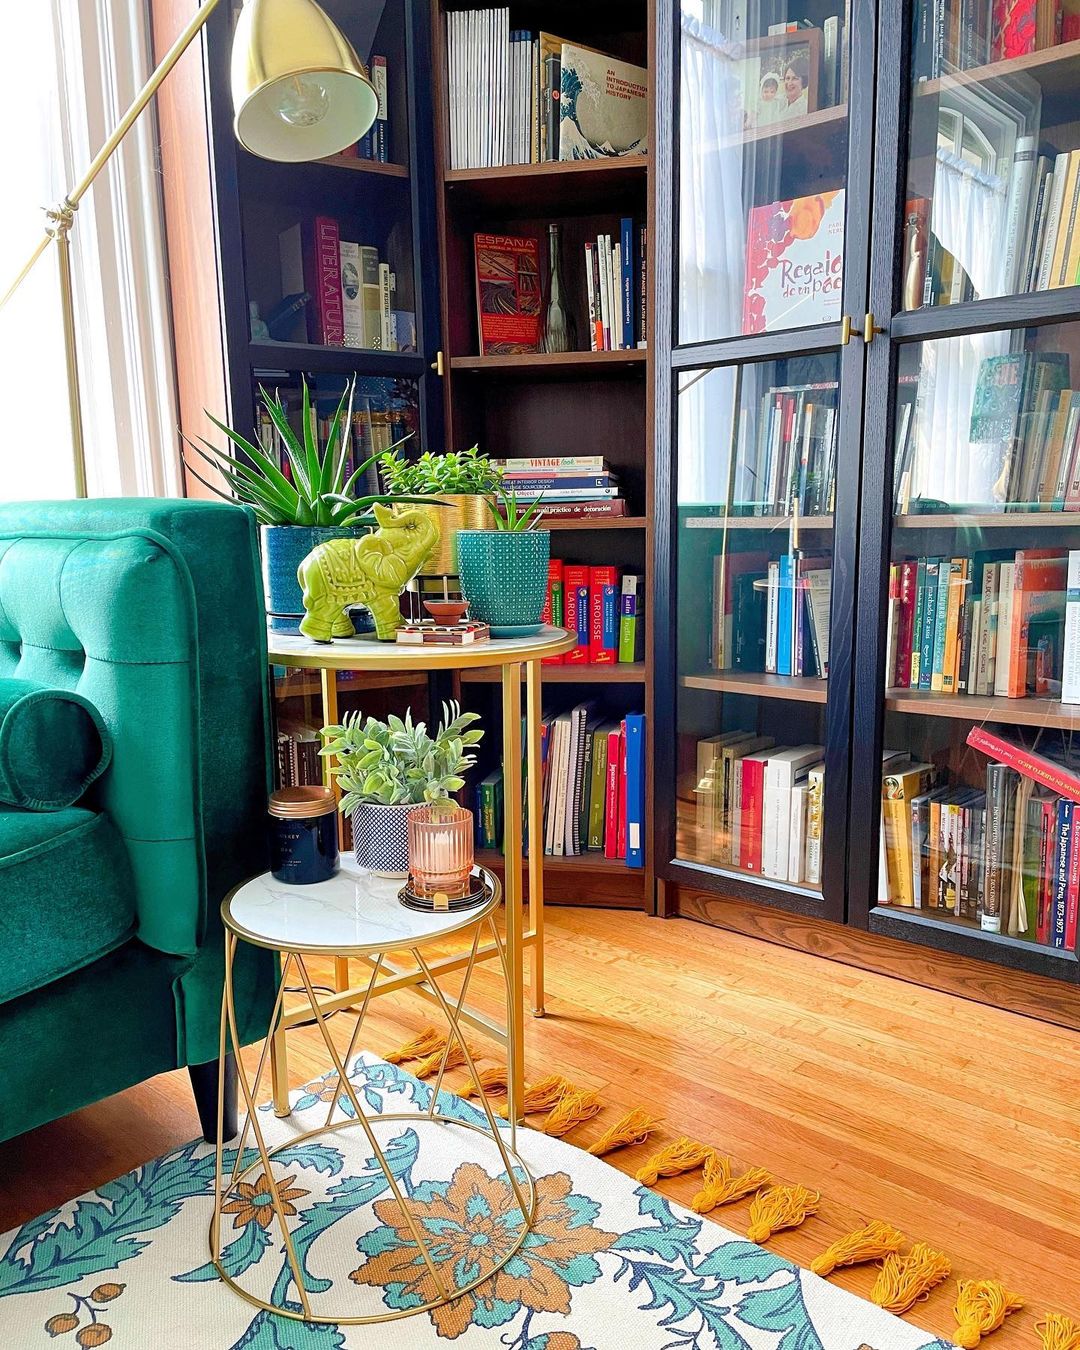 15 Smart Tips for Organizing a Small Apartment